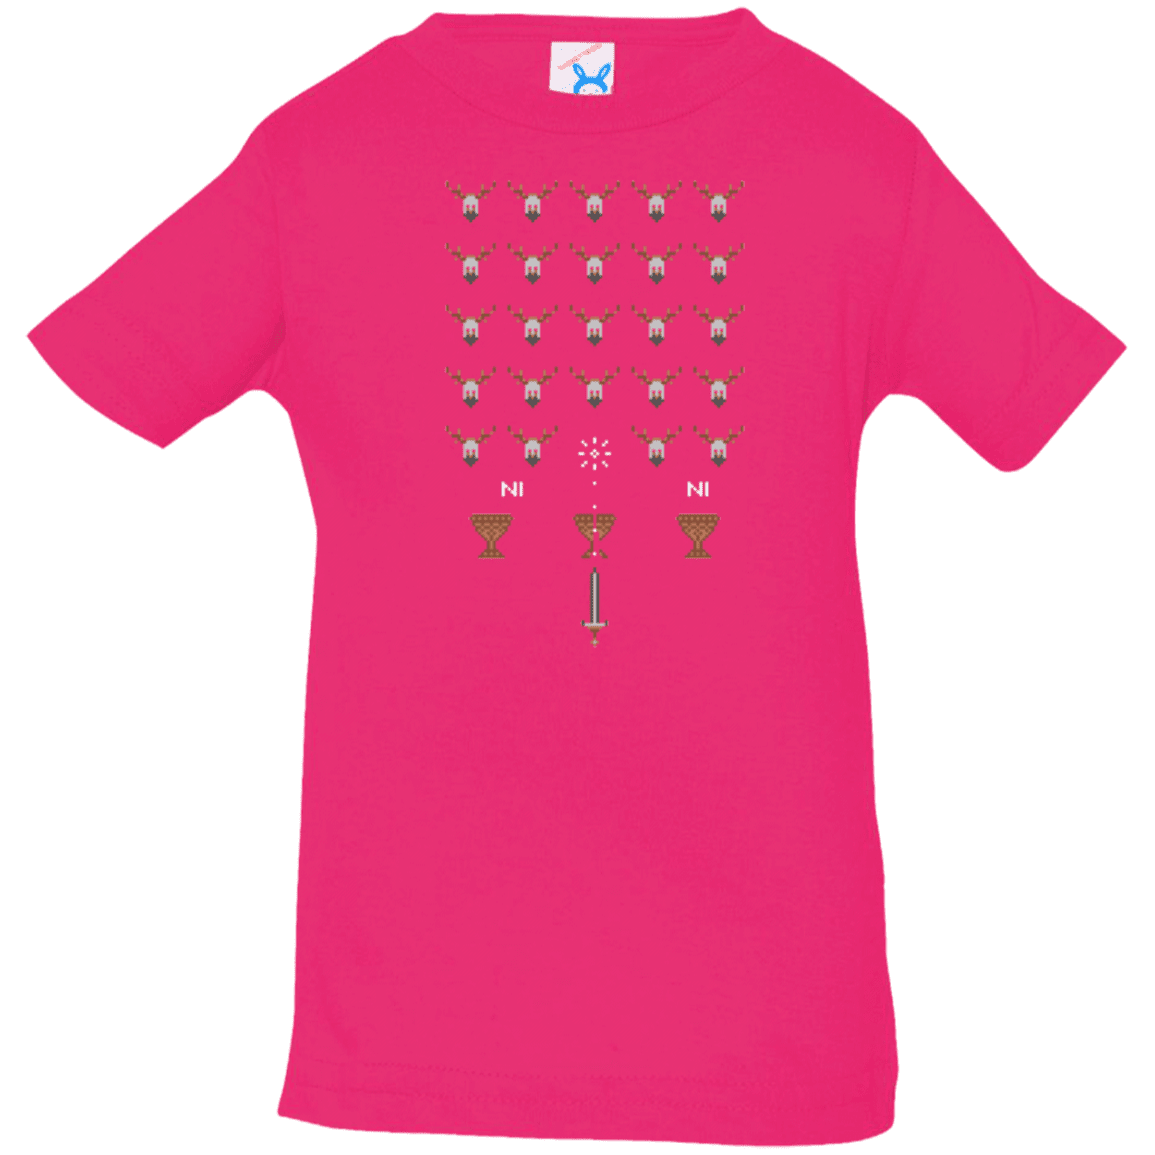 T-Shirts Hot Pink / 6 Months Space NI Invaders Infant Premium T-Shirt